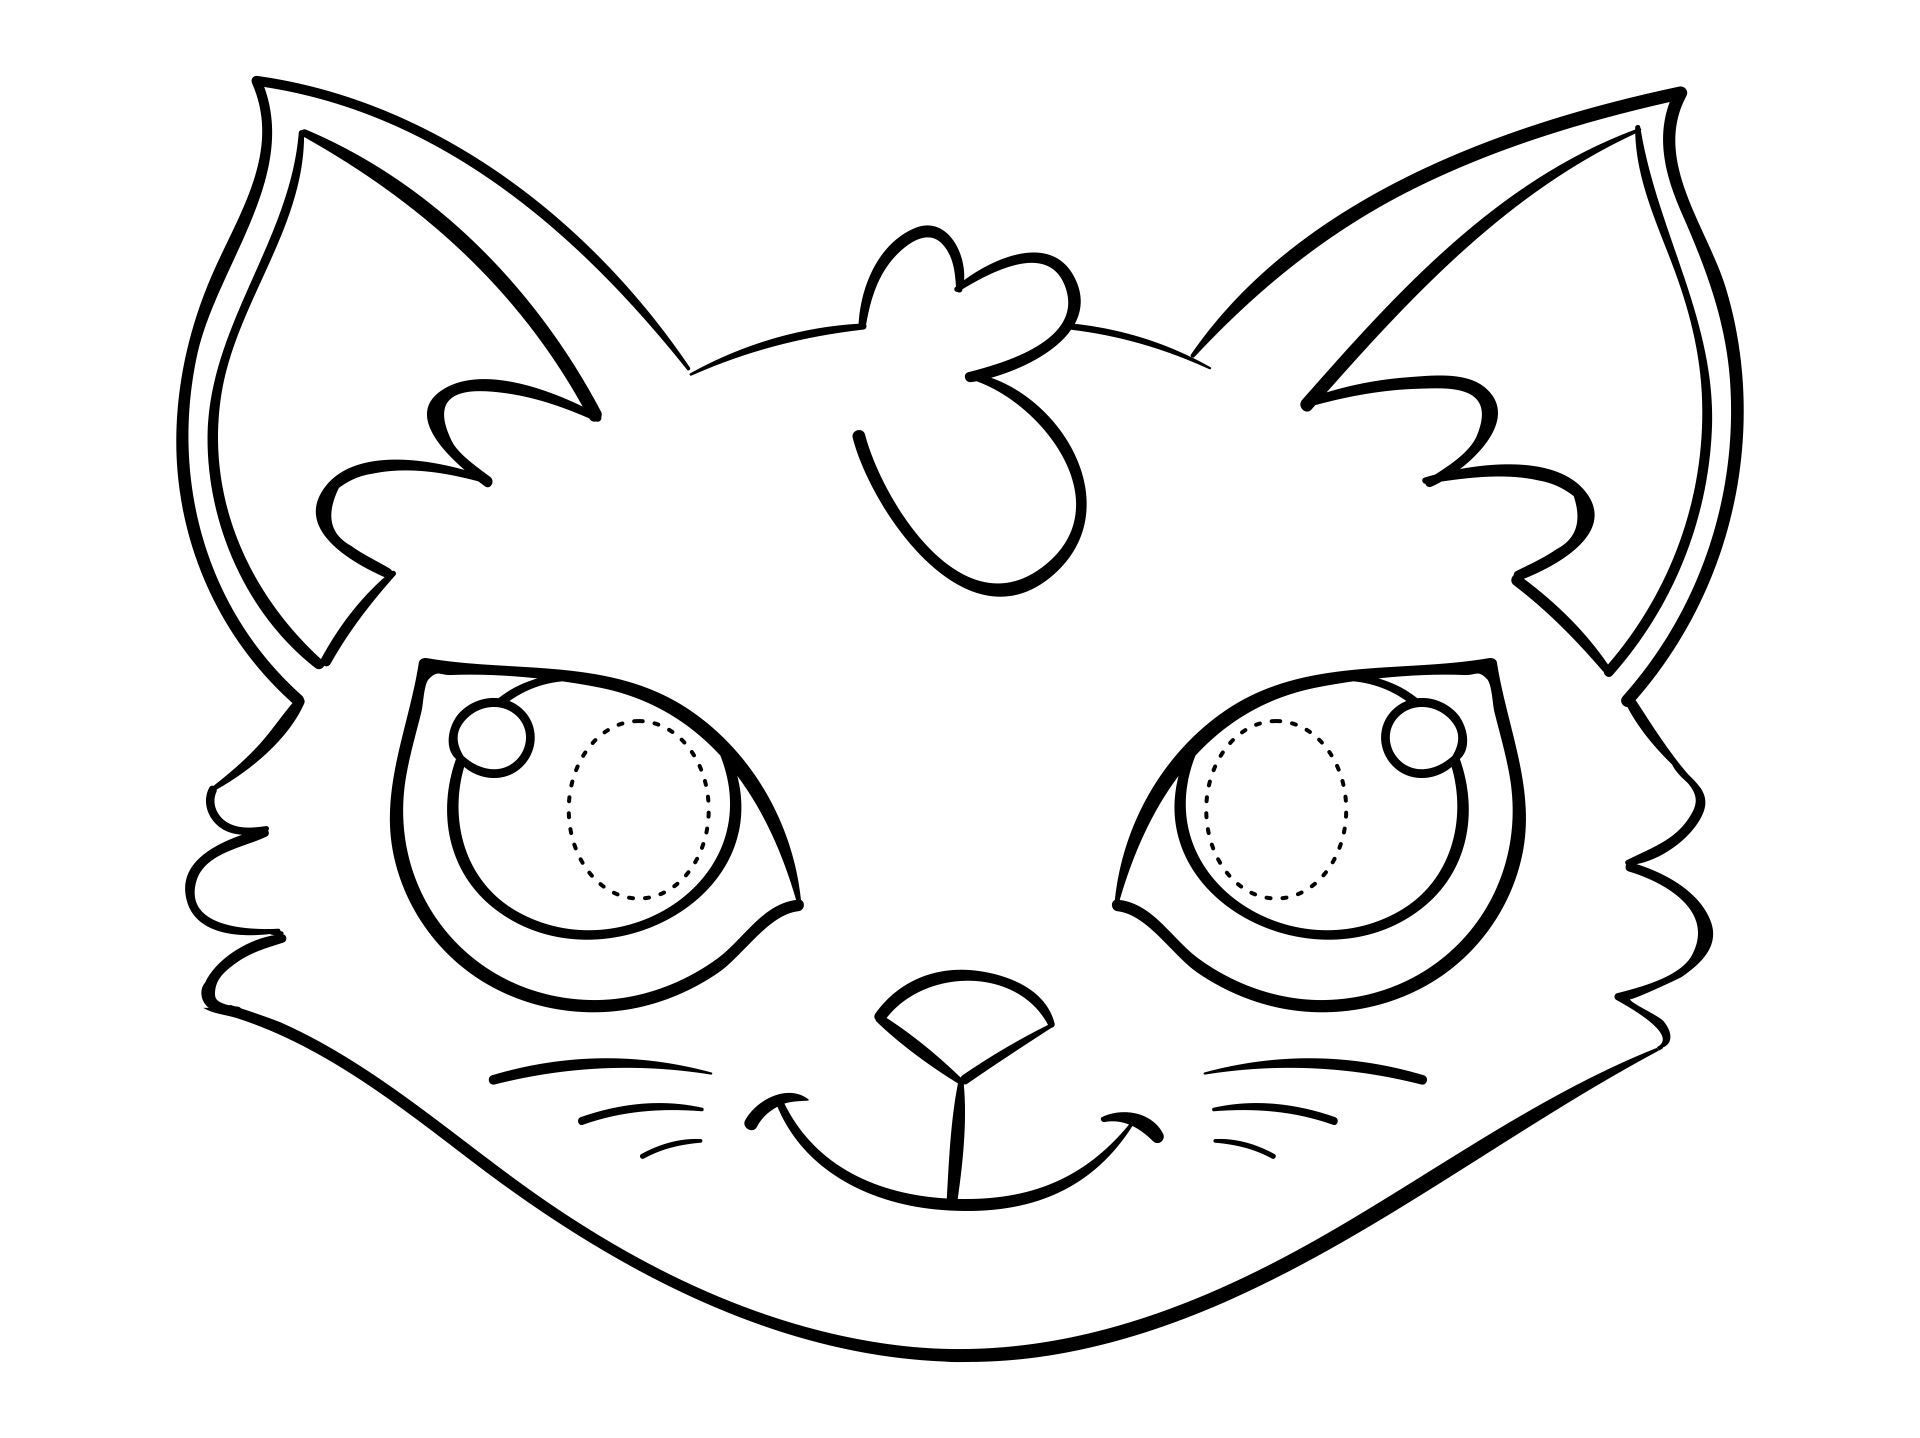 Black Cat Mask To Color Printable